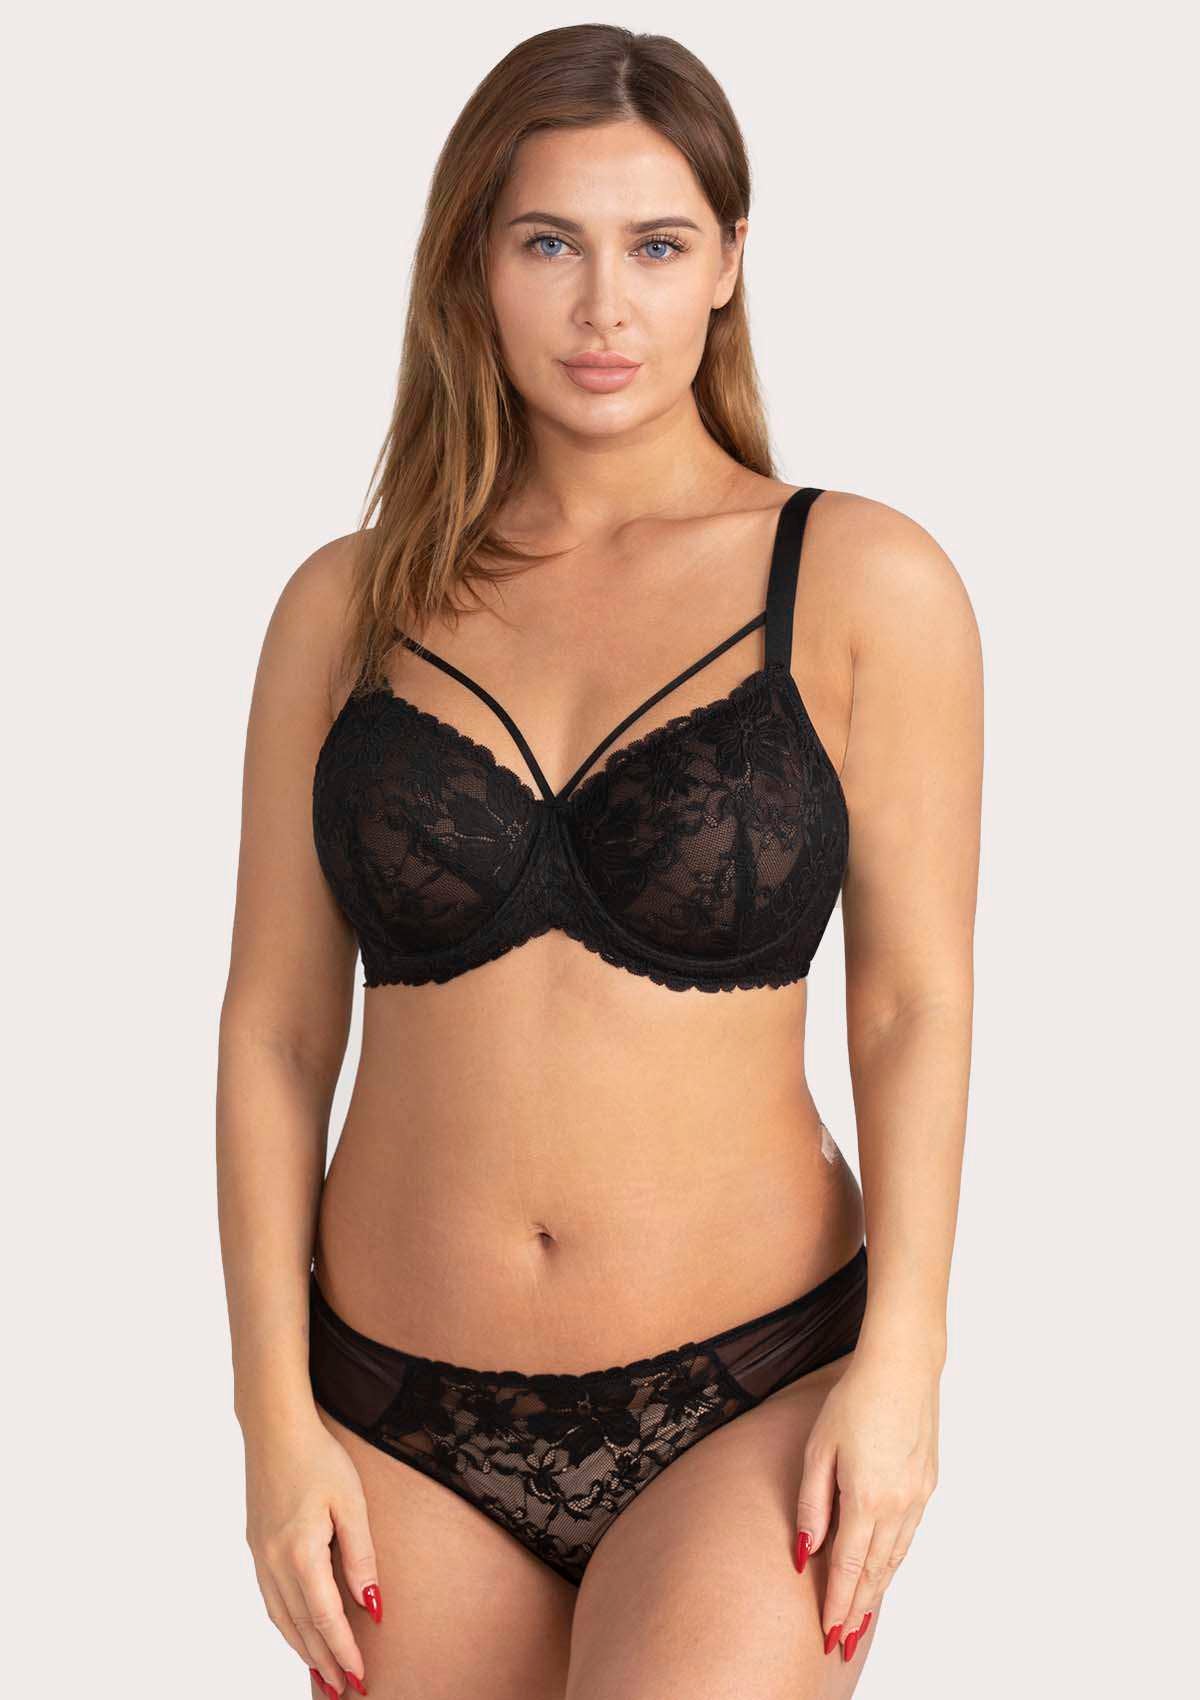 HSIA Pretty In Petals Lace Bra And Panty Set: Non Padded Wired Bra - Black / 46 / D